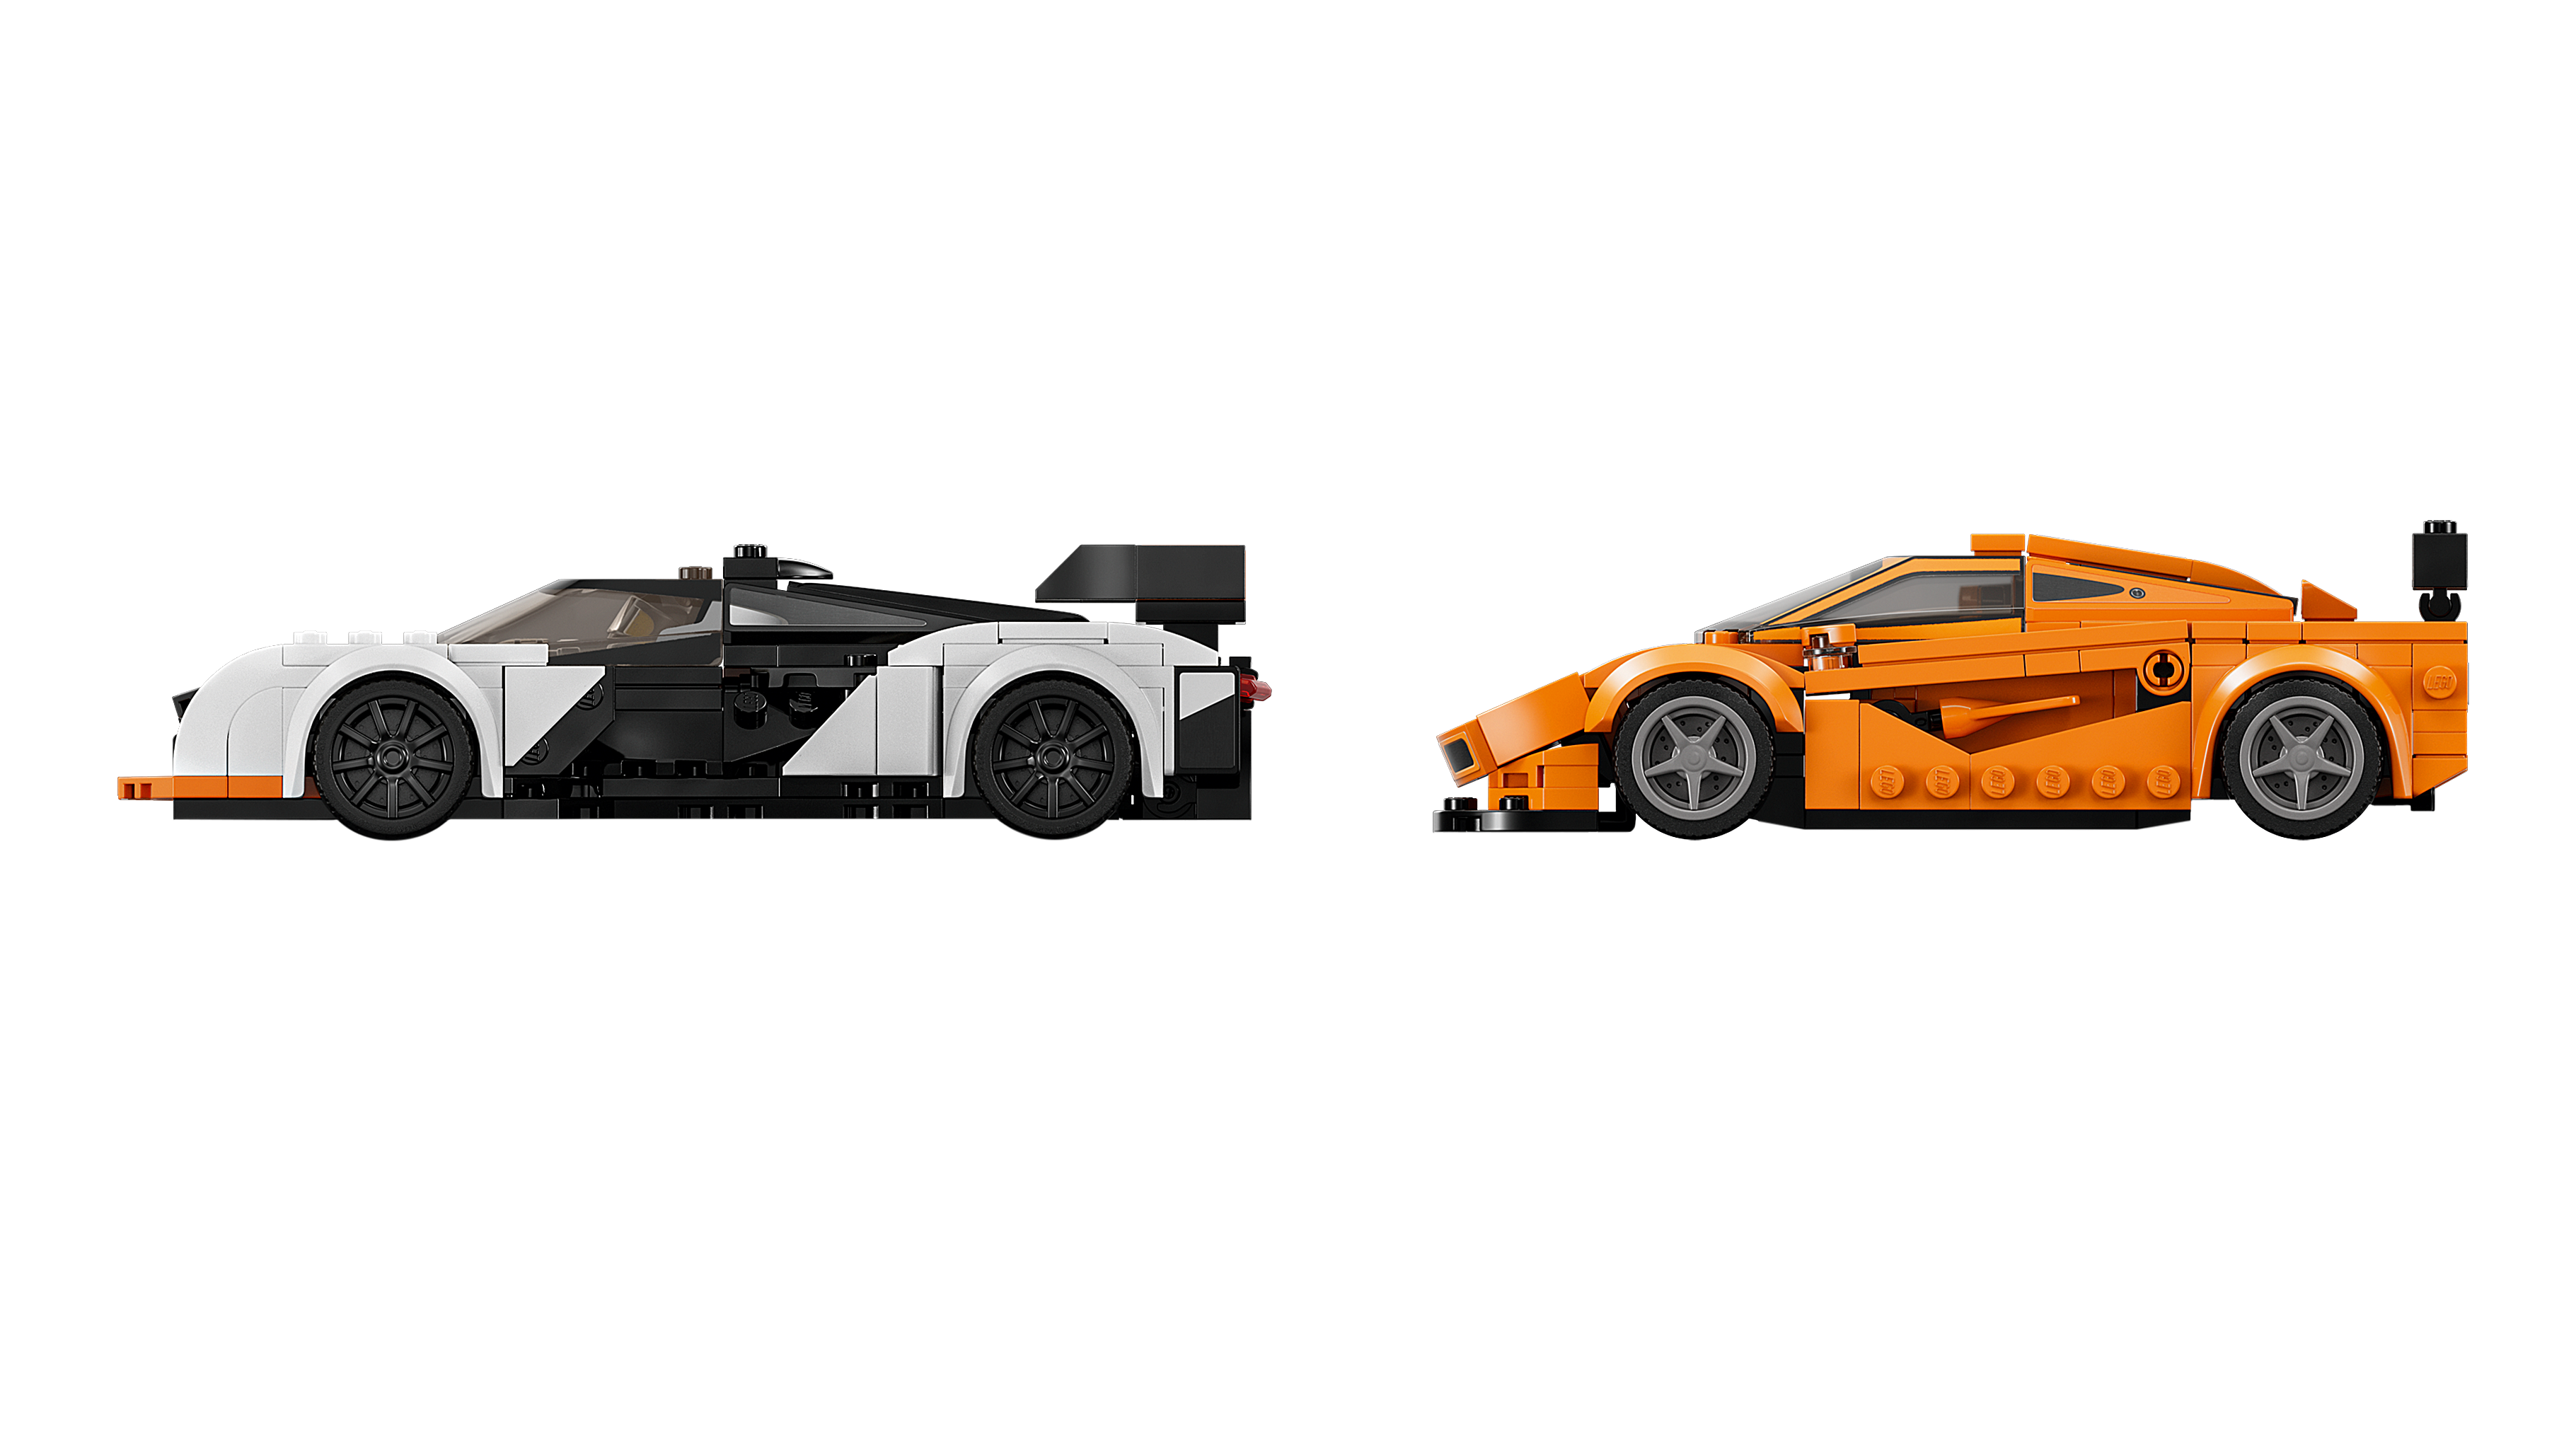 McLaren F1 LM, Solus GT Debut As Lego Kits, Video Visits Toymaker's HQ